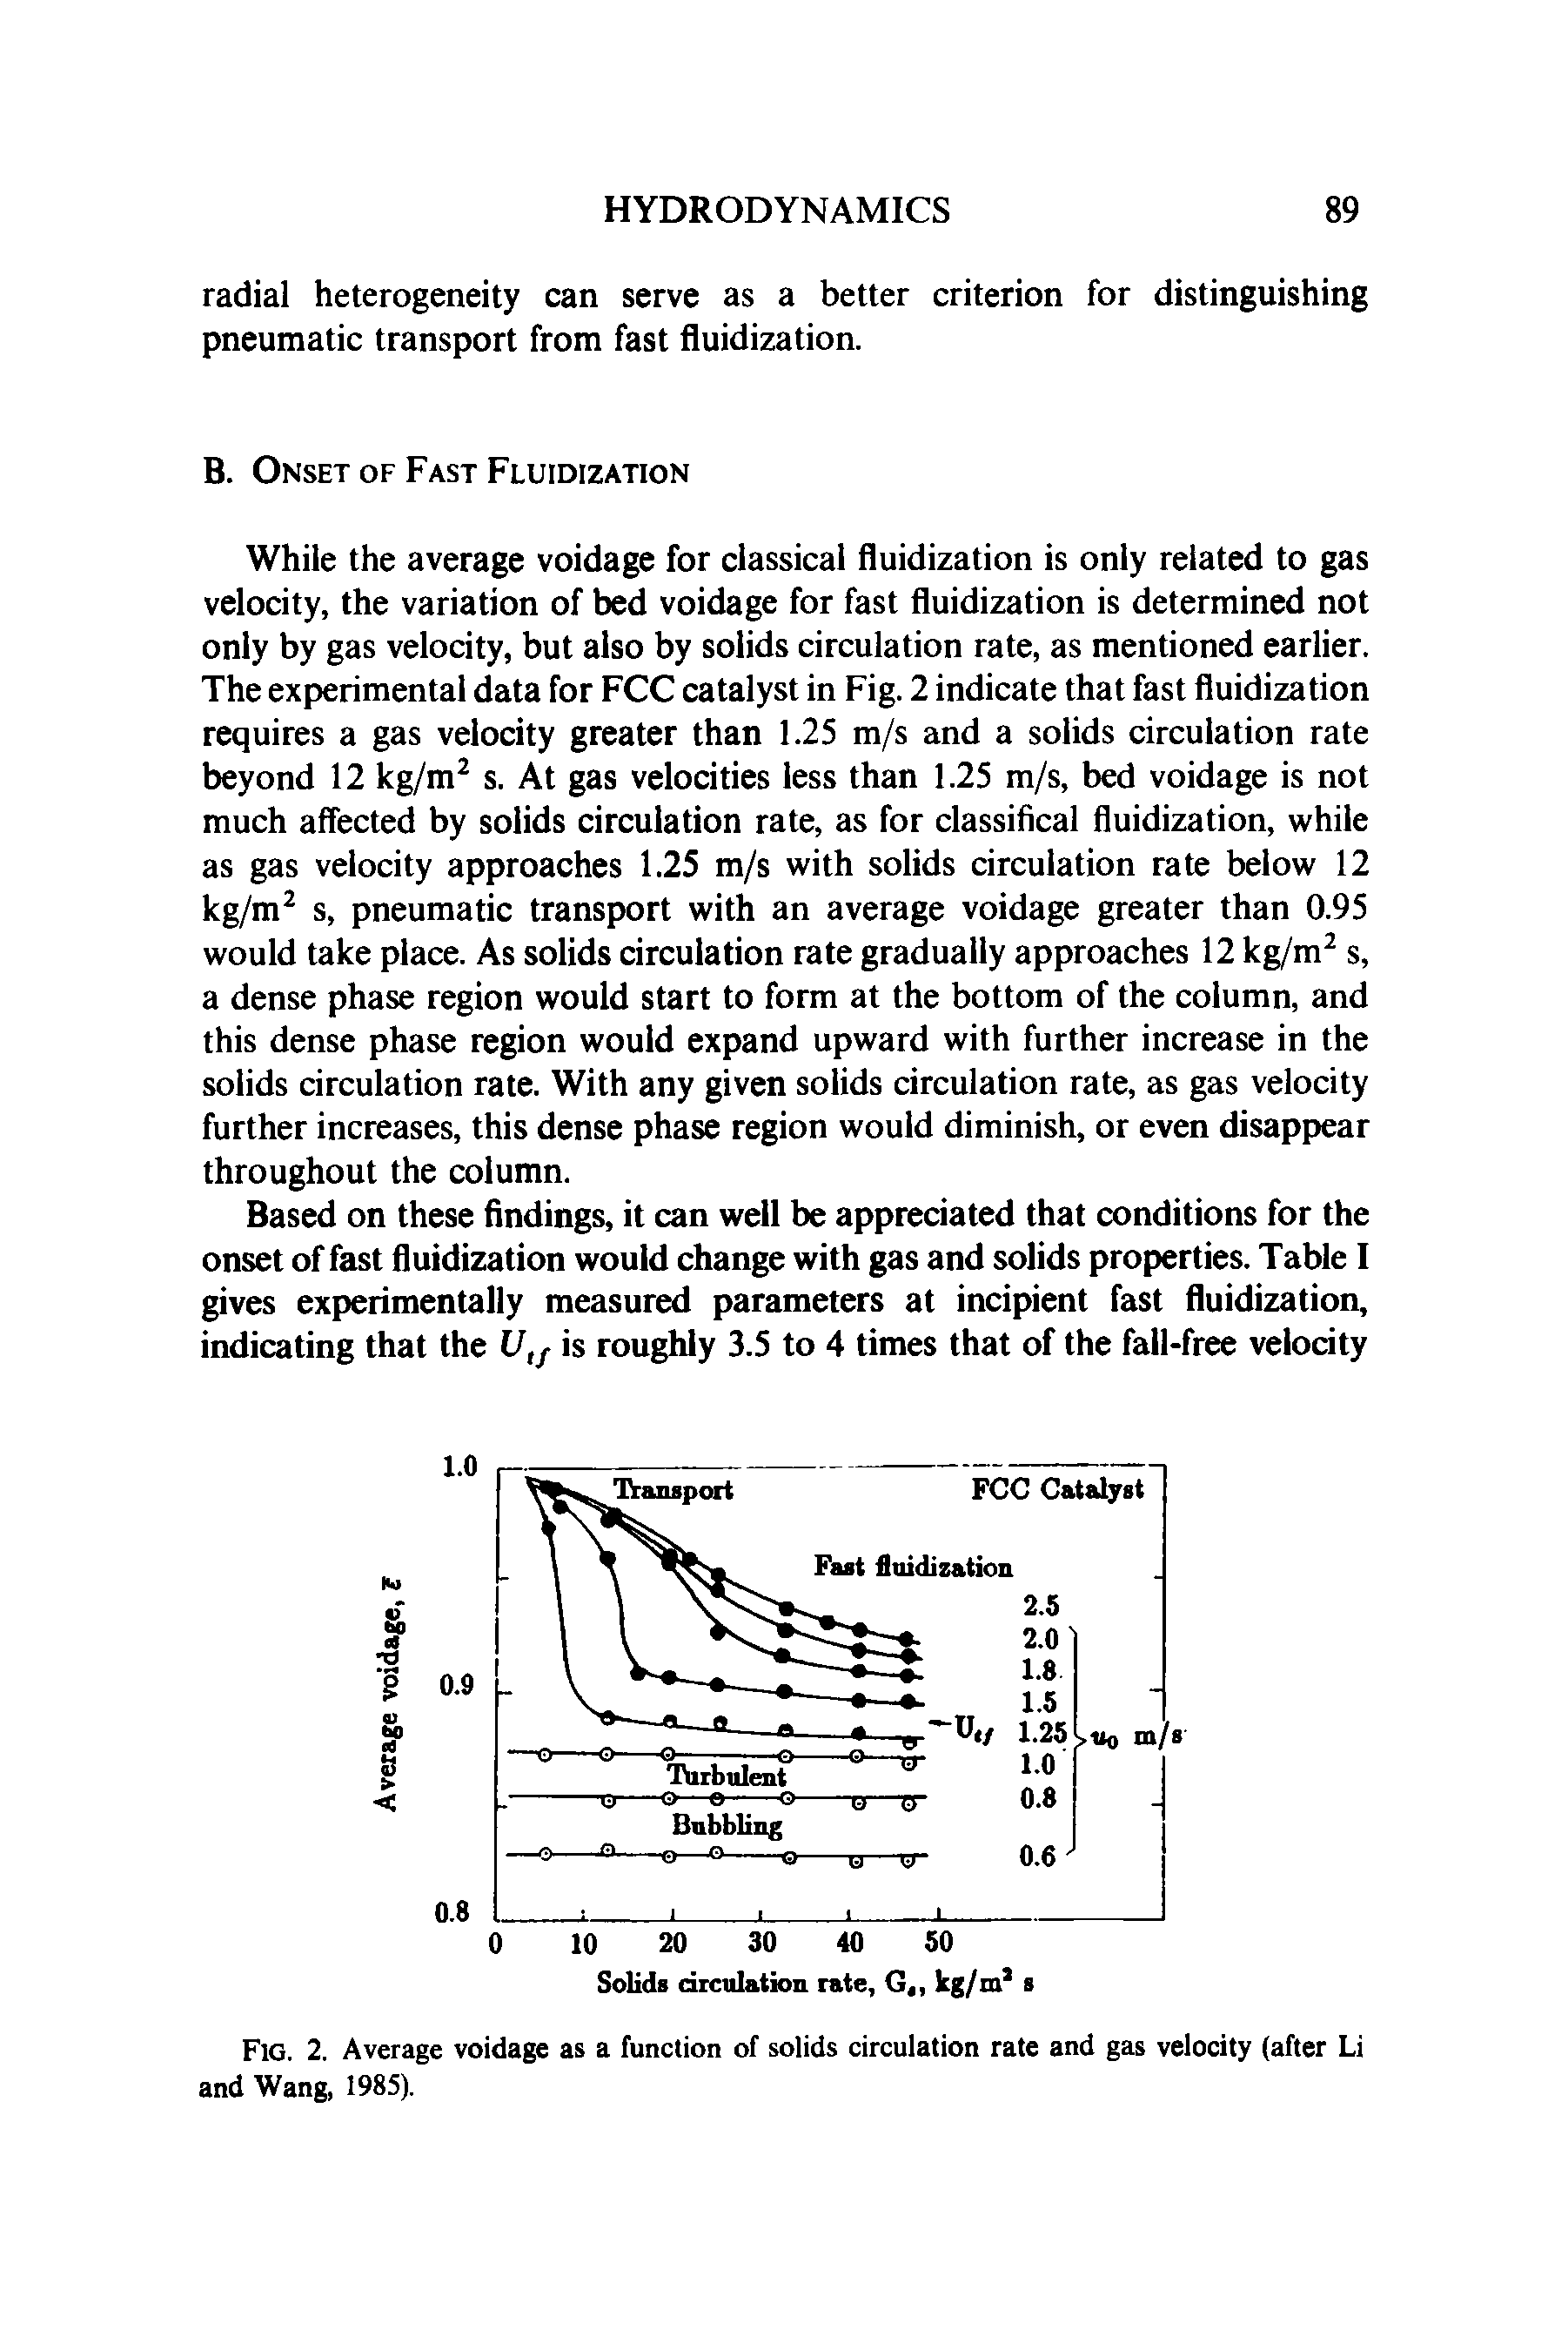 Fig. 2. Average voidage as a function of solids circulation rate and gas velocity (after Li and Wang, 1985).